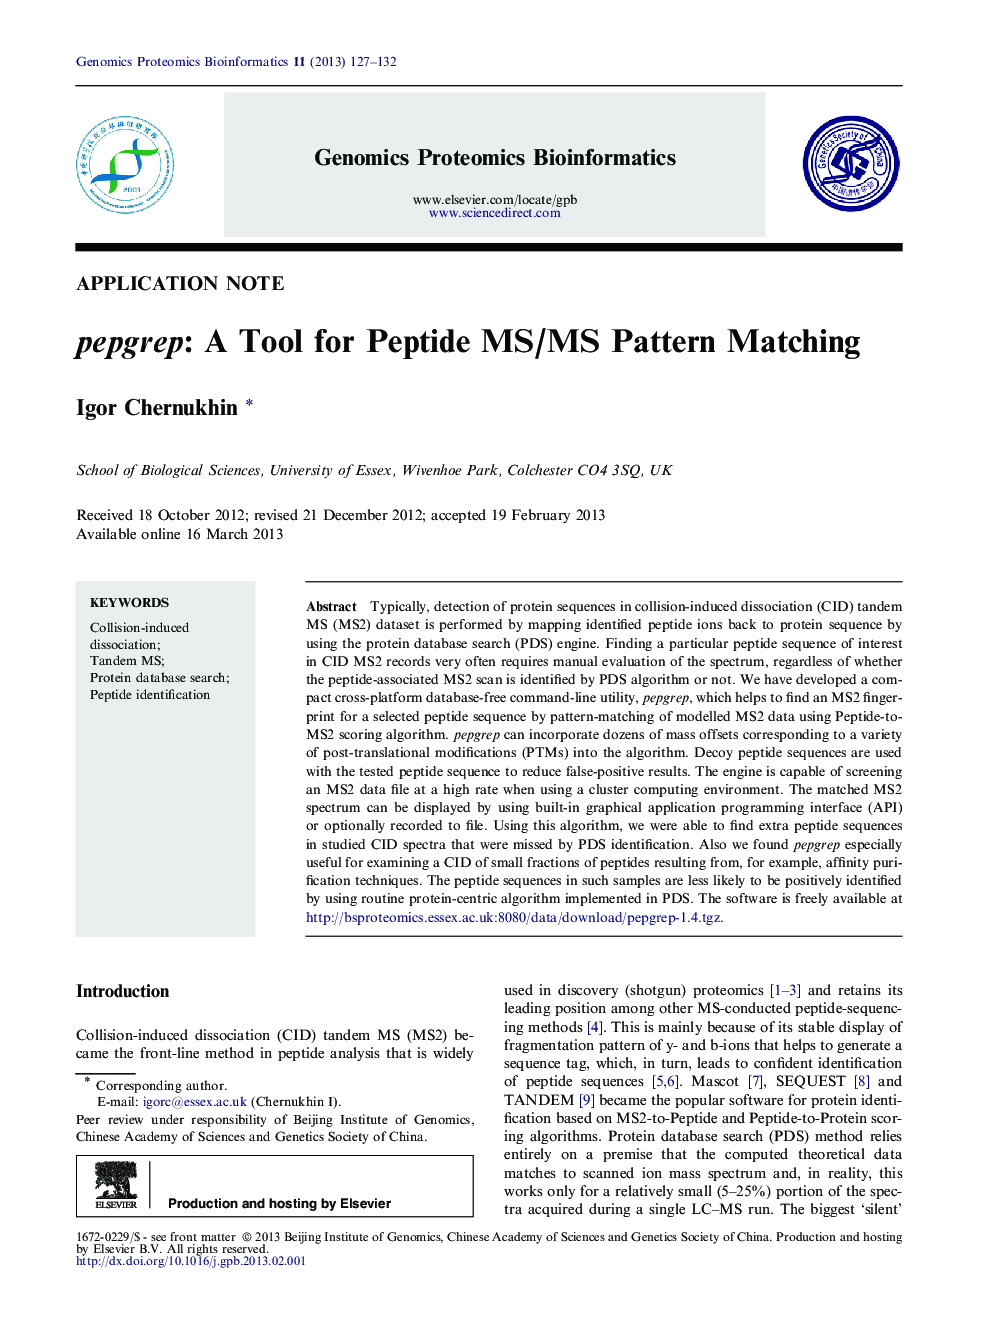 pepgrep: A Tool for Peptide MS/MS Pattern Matching 